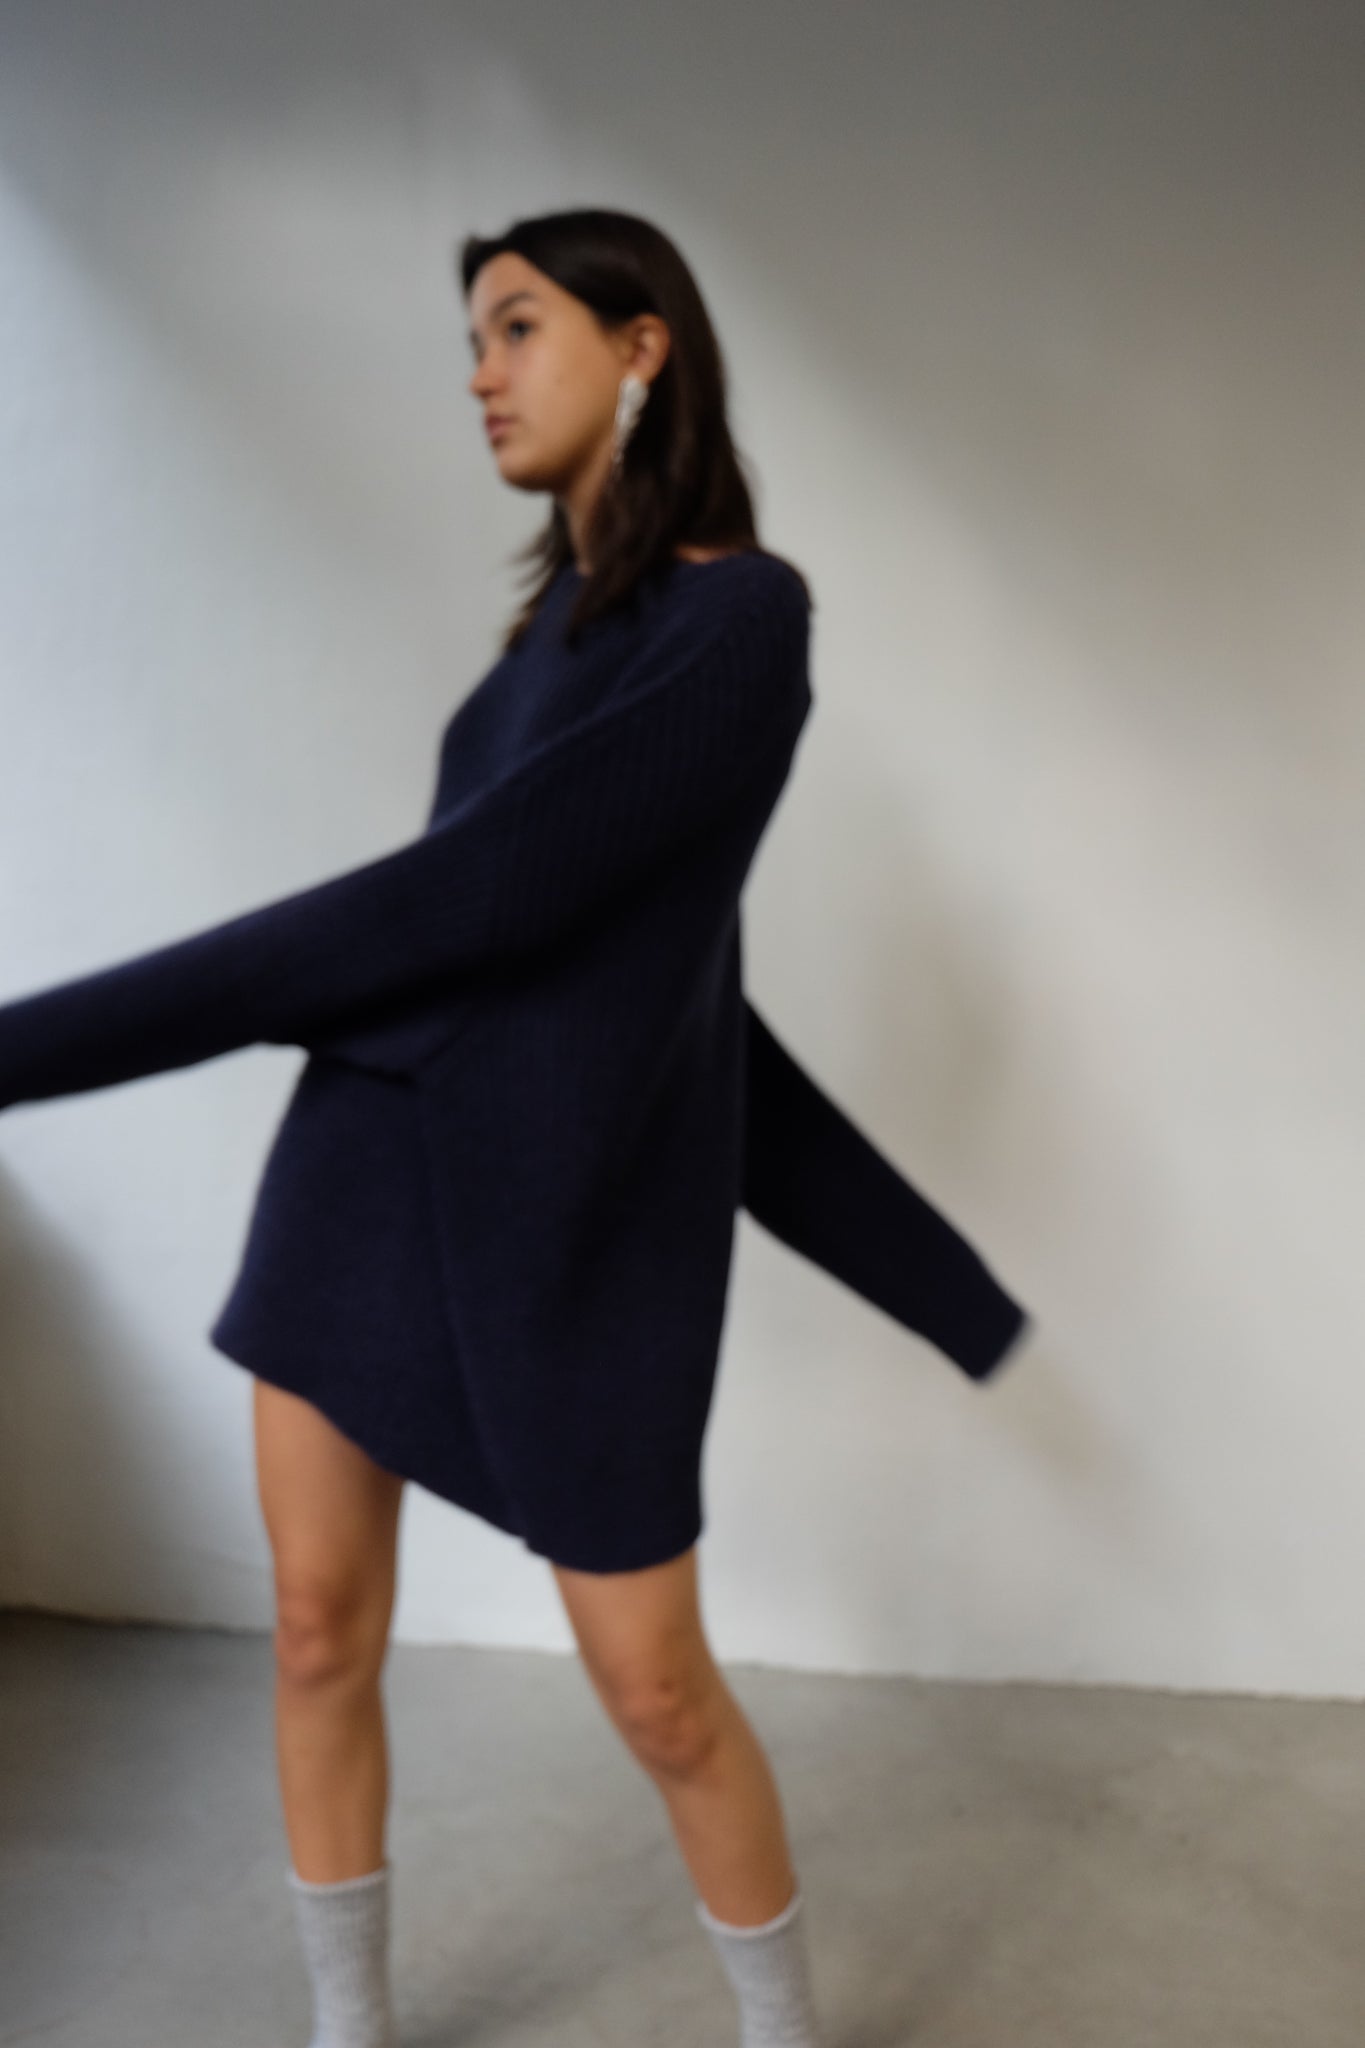 BLUE RIB KNIT OVERSIZED BY CAN PEP REY